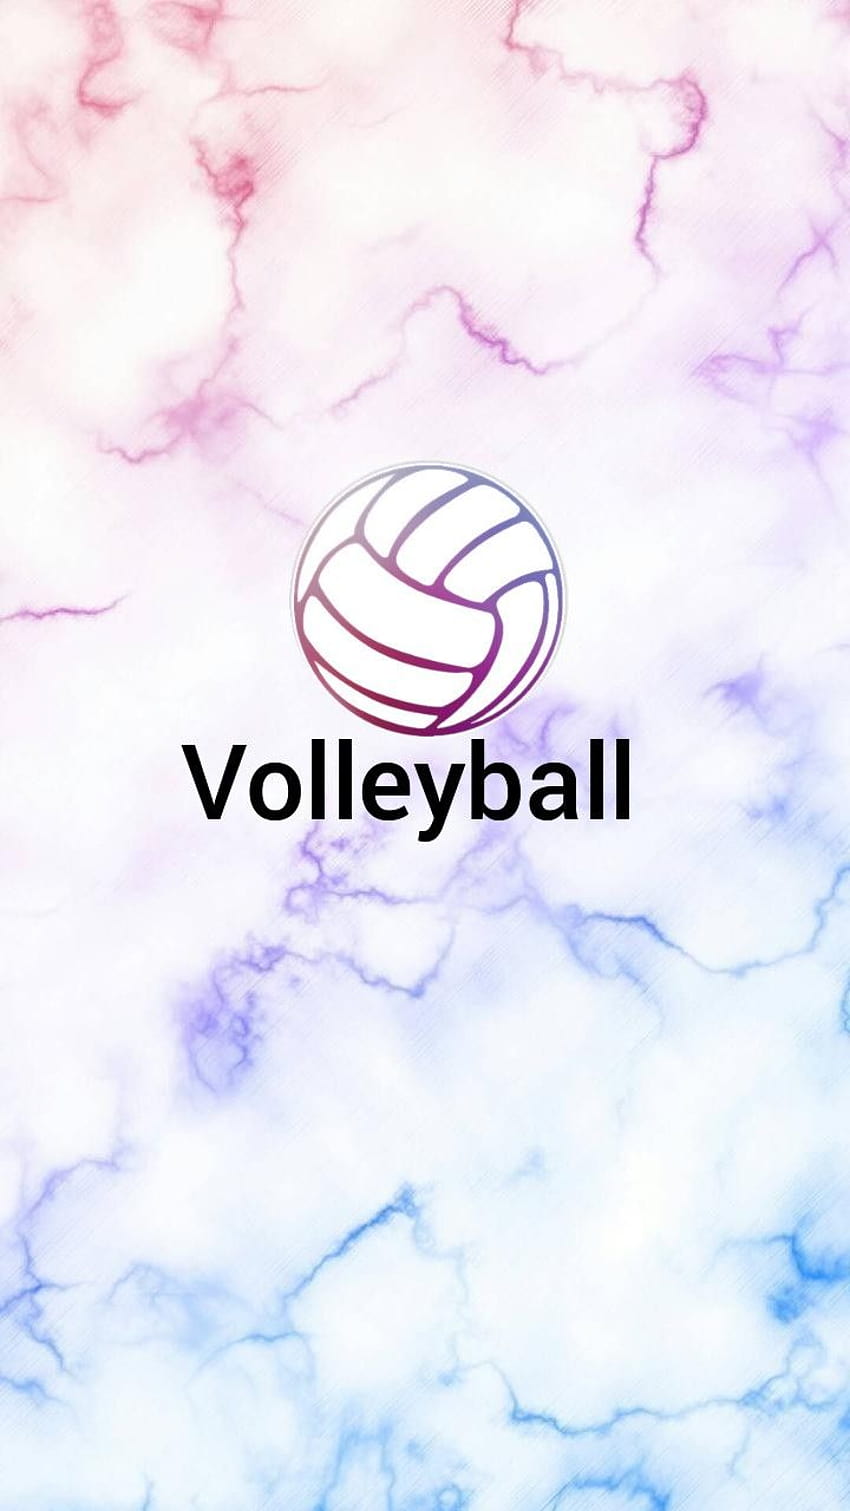 Volleyball logo on a marble background - Volleyball